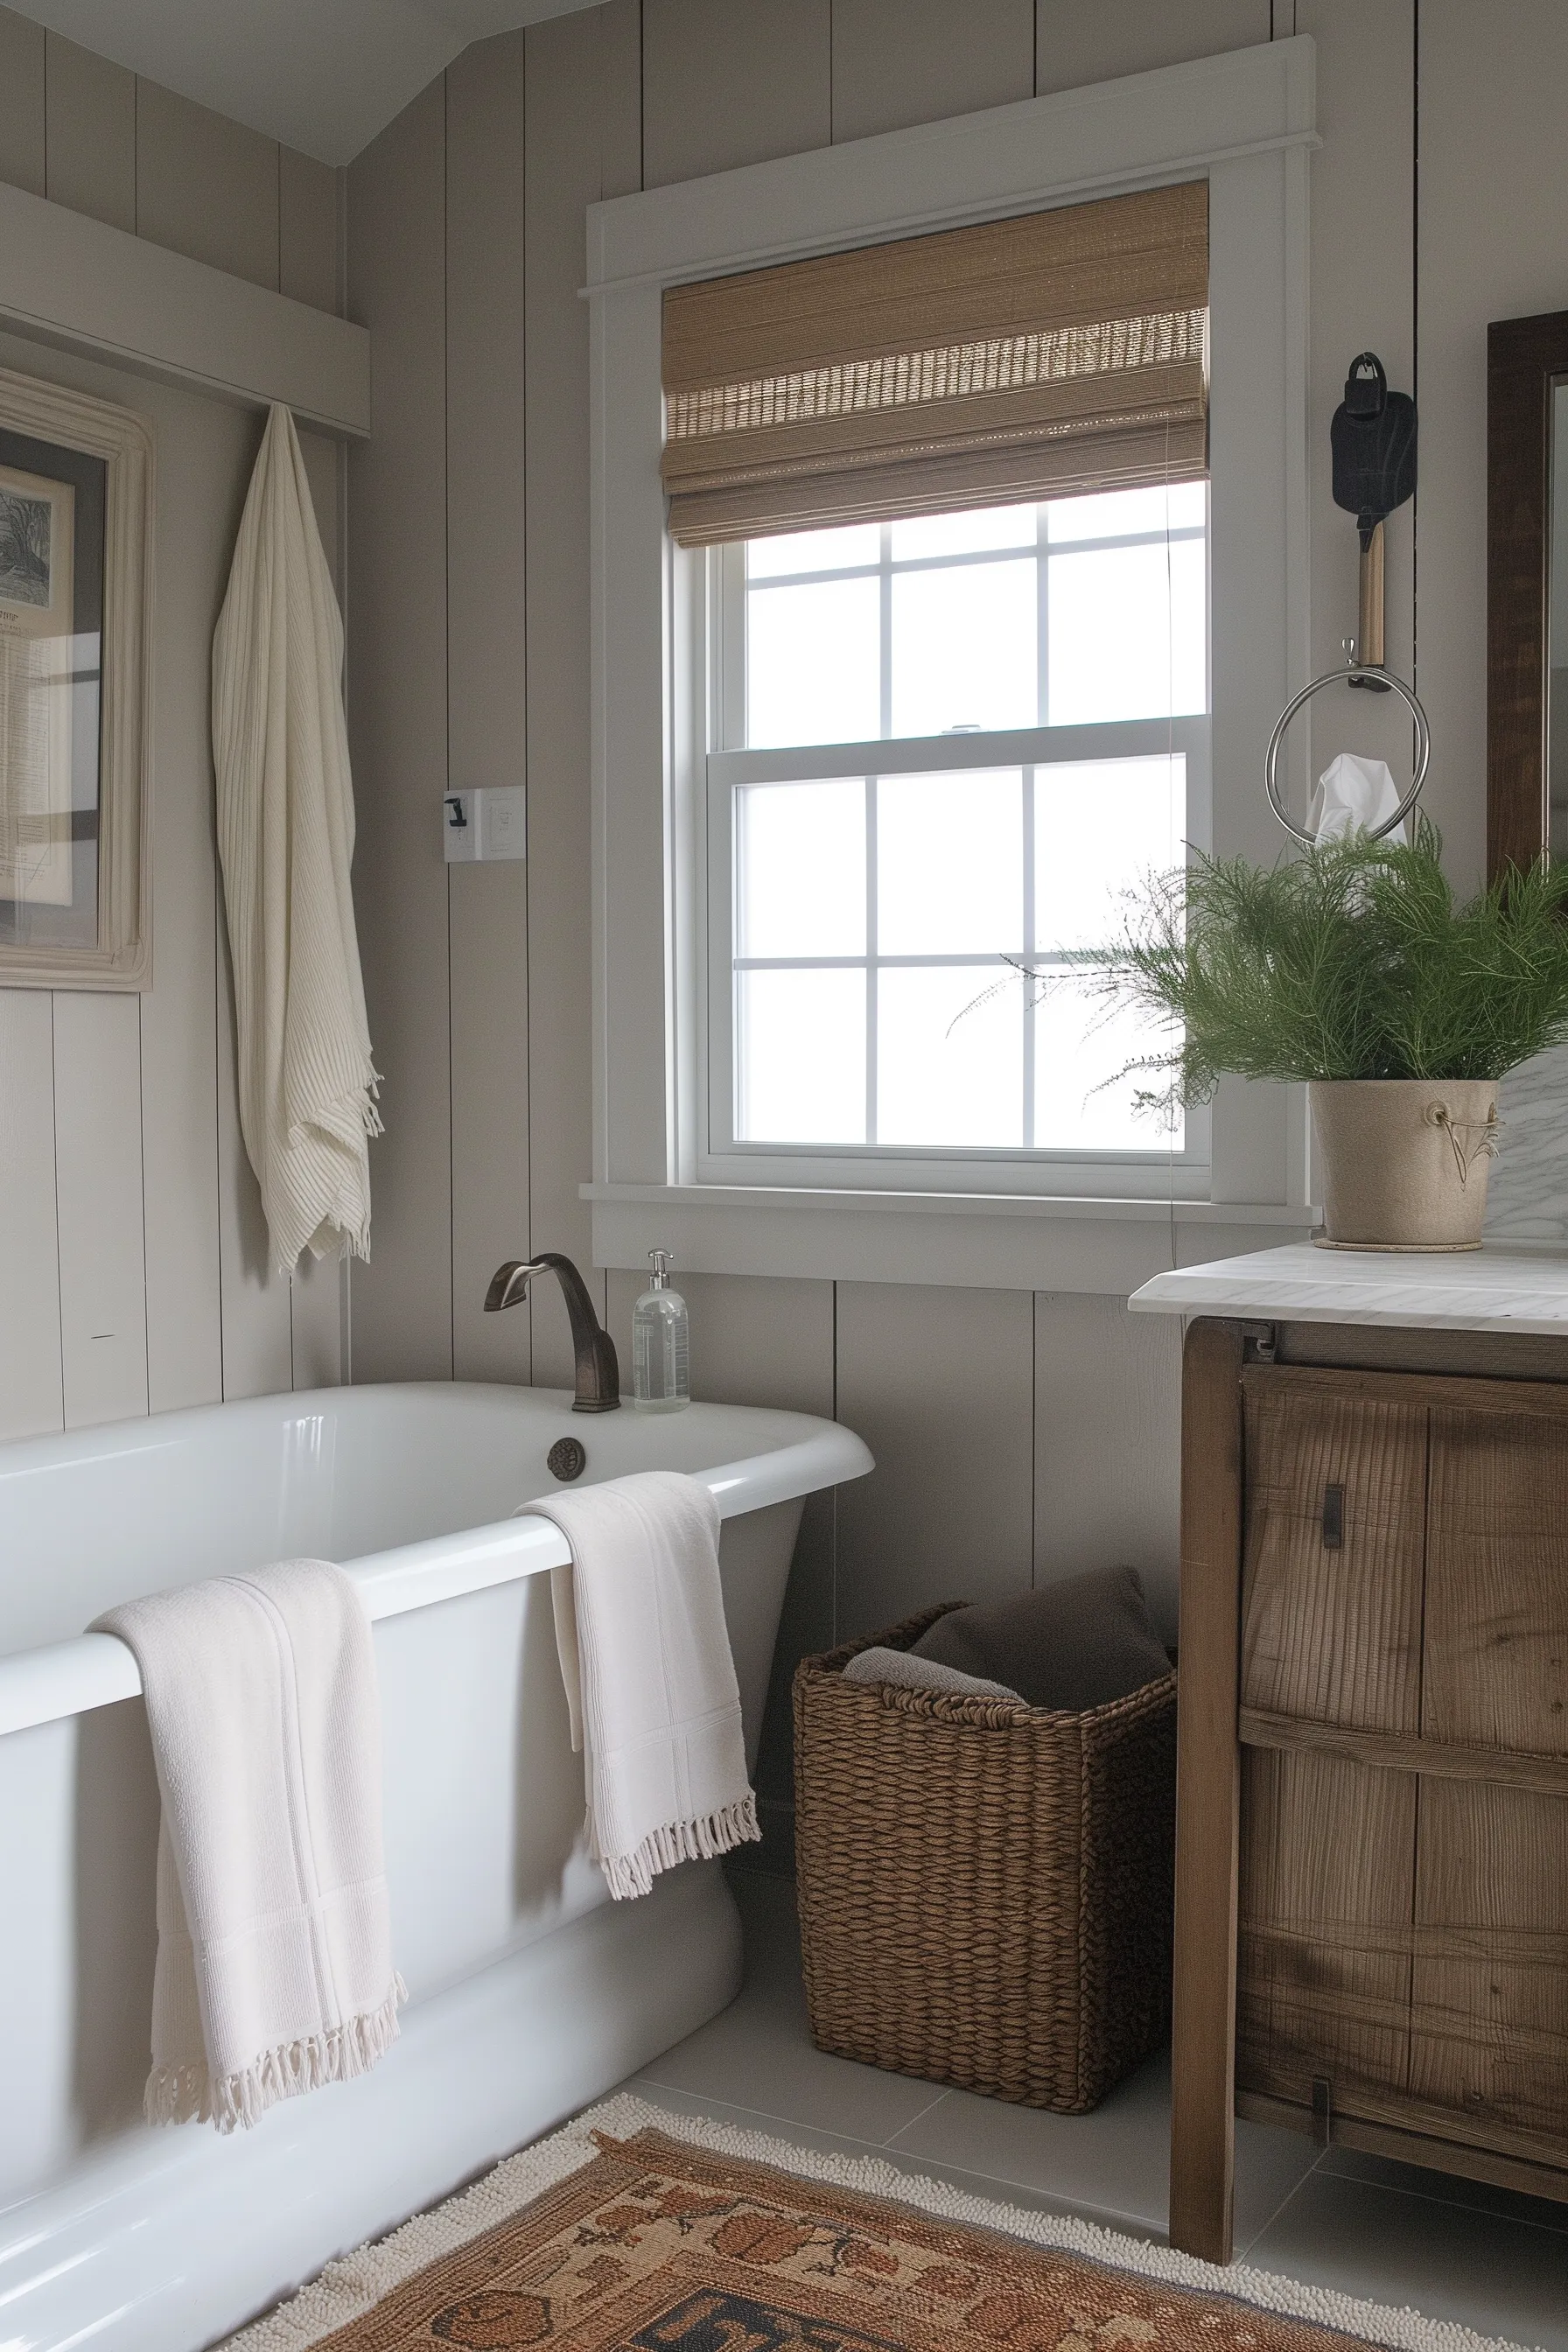 A white farmhouse bathroom with a woven basket, towels and plants